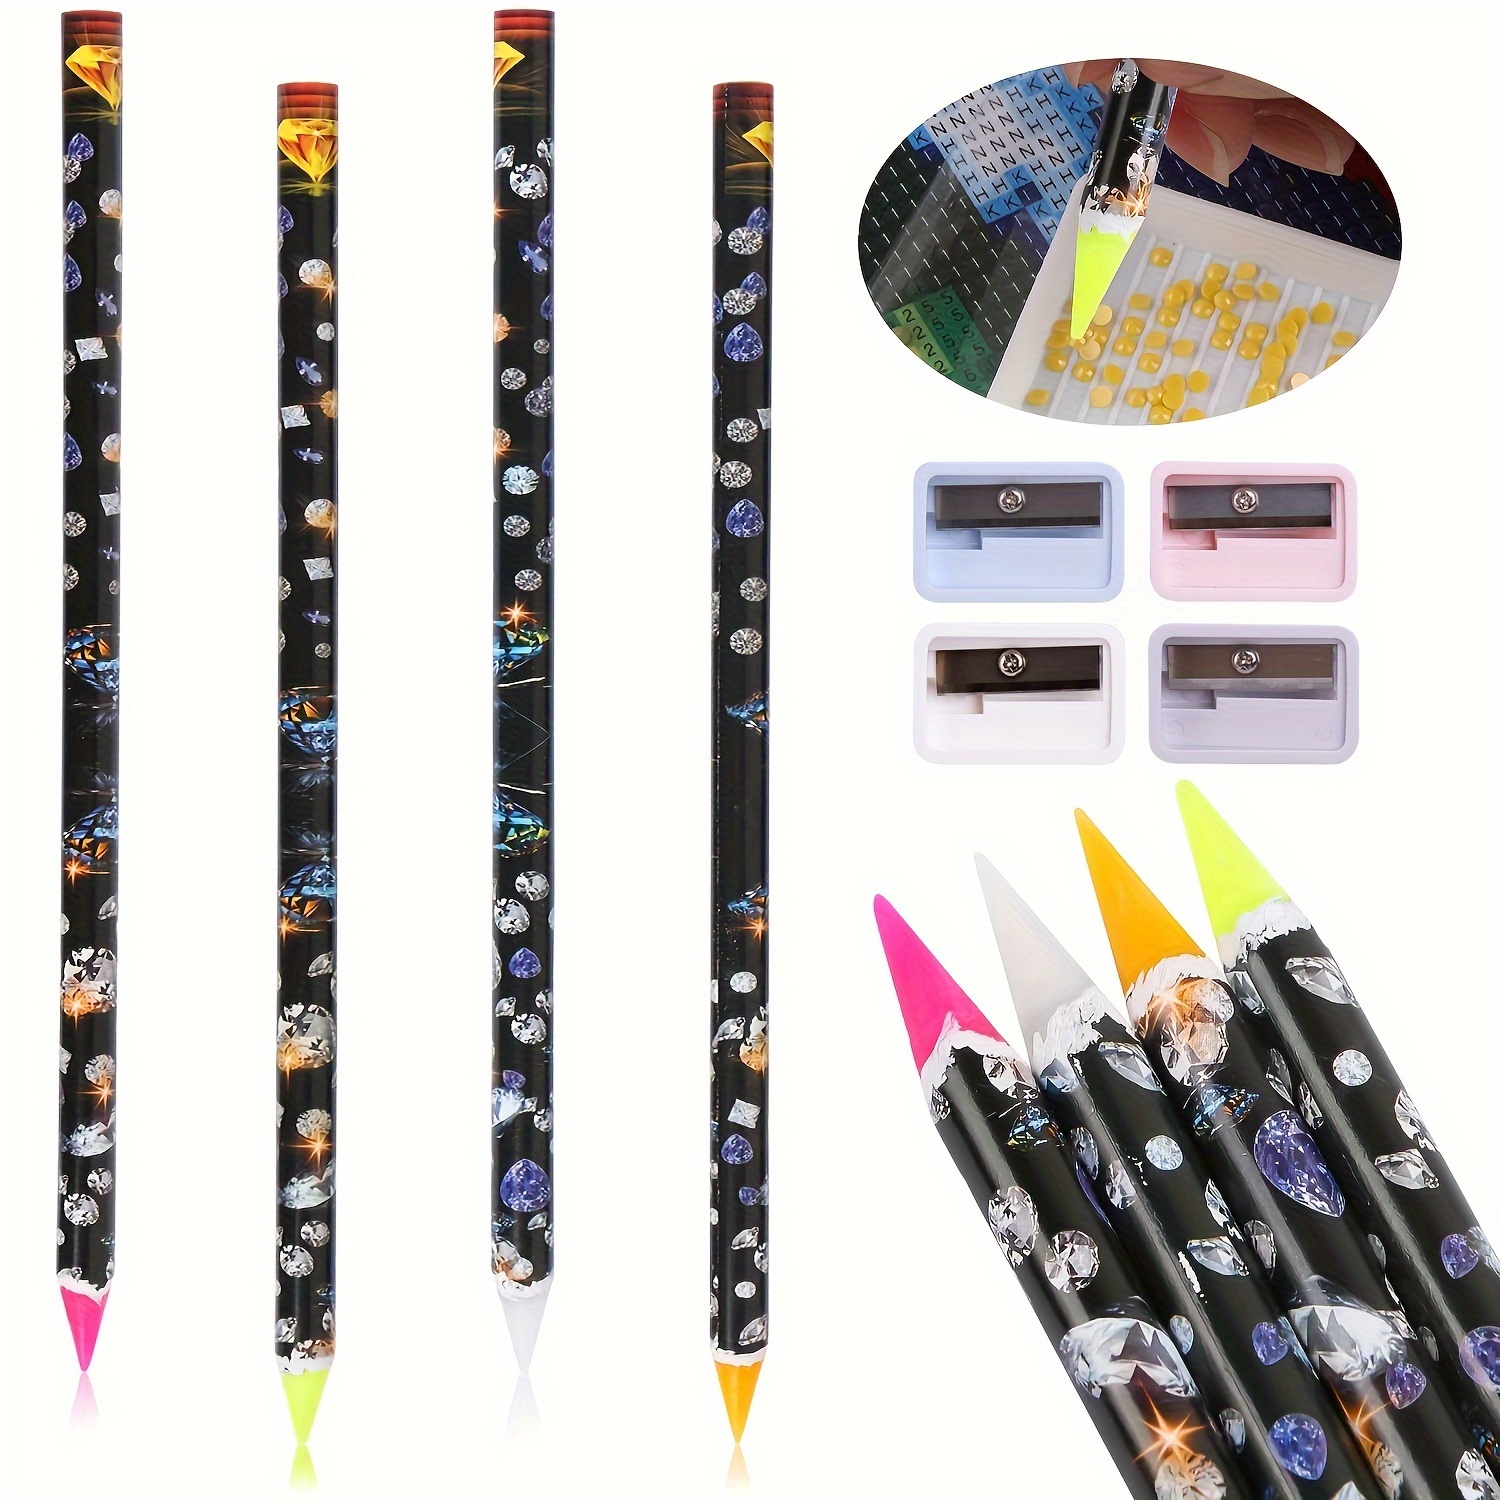 29pcs/set 5D DIY Rhinestone Painting Tools And Accessories Kit With Diamond  Embroidery Cover And Multi-size Paintbrushes For Adults Making Art Craft T